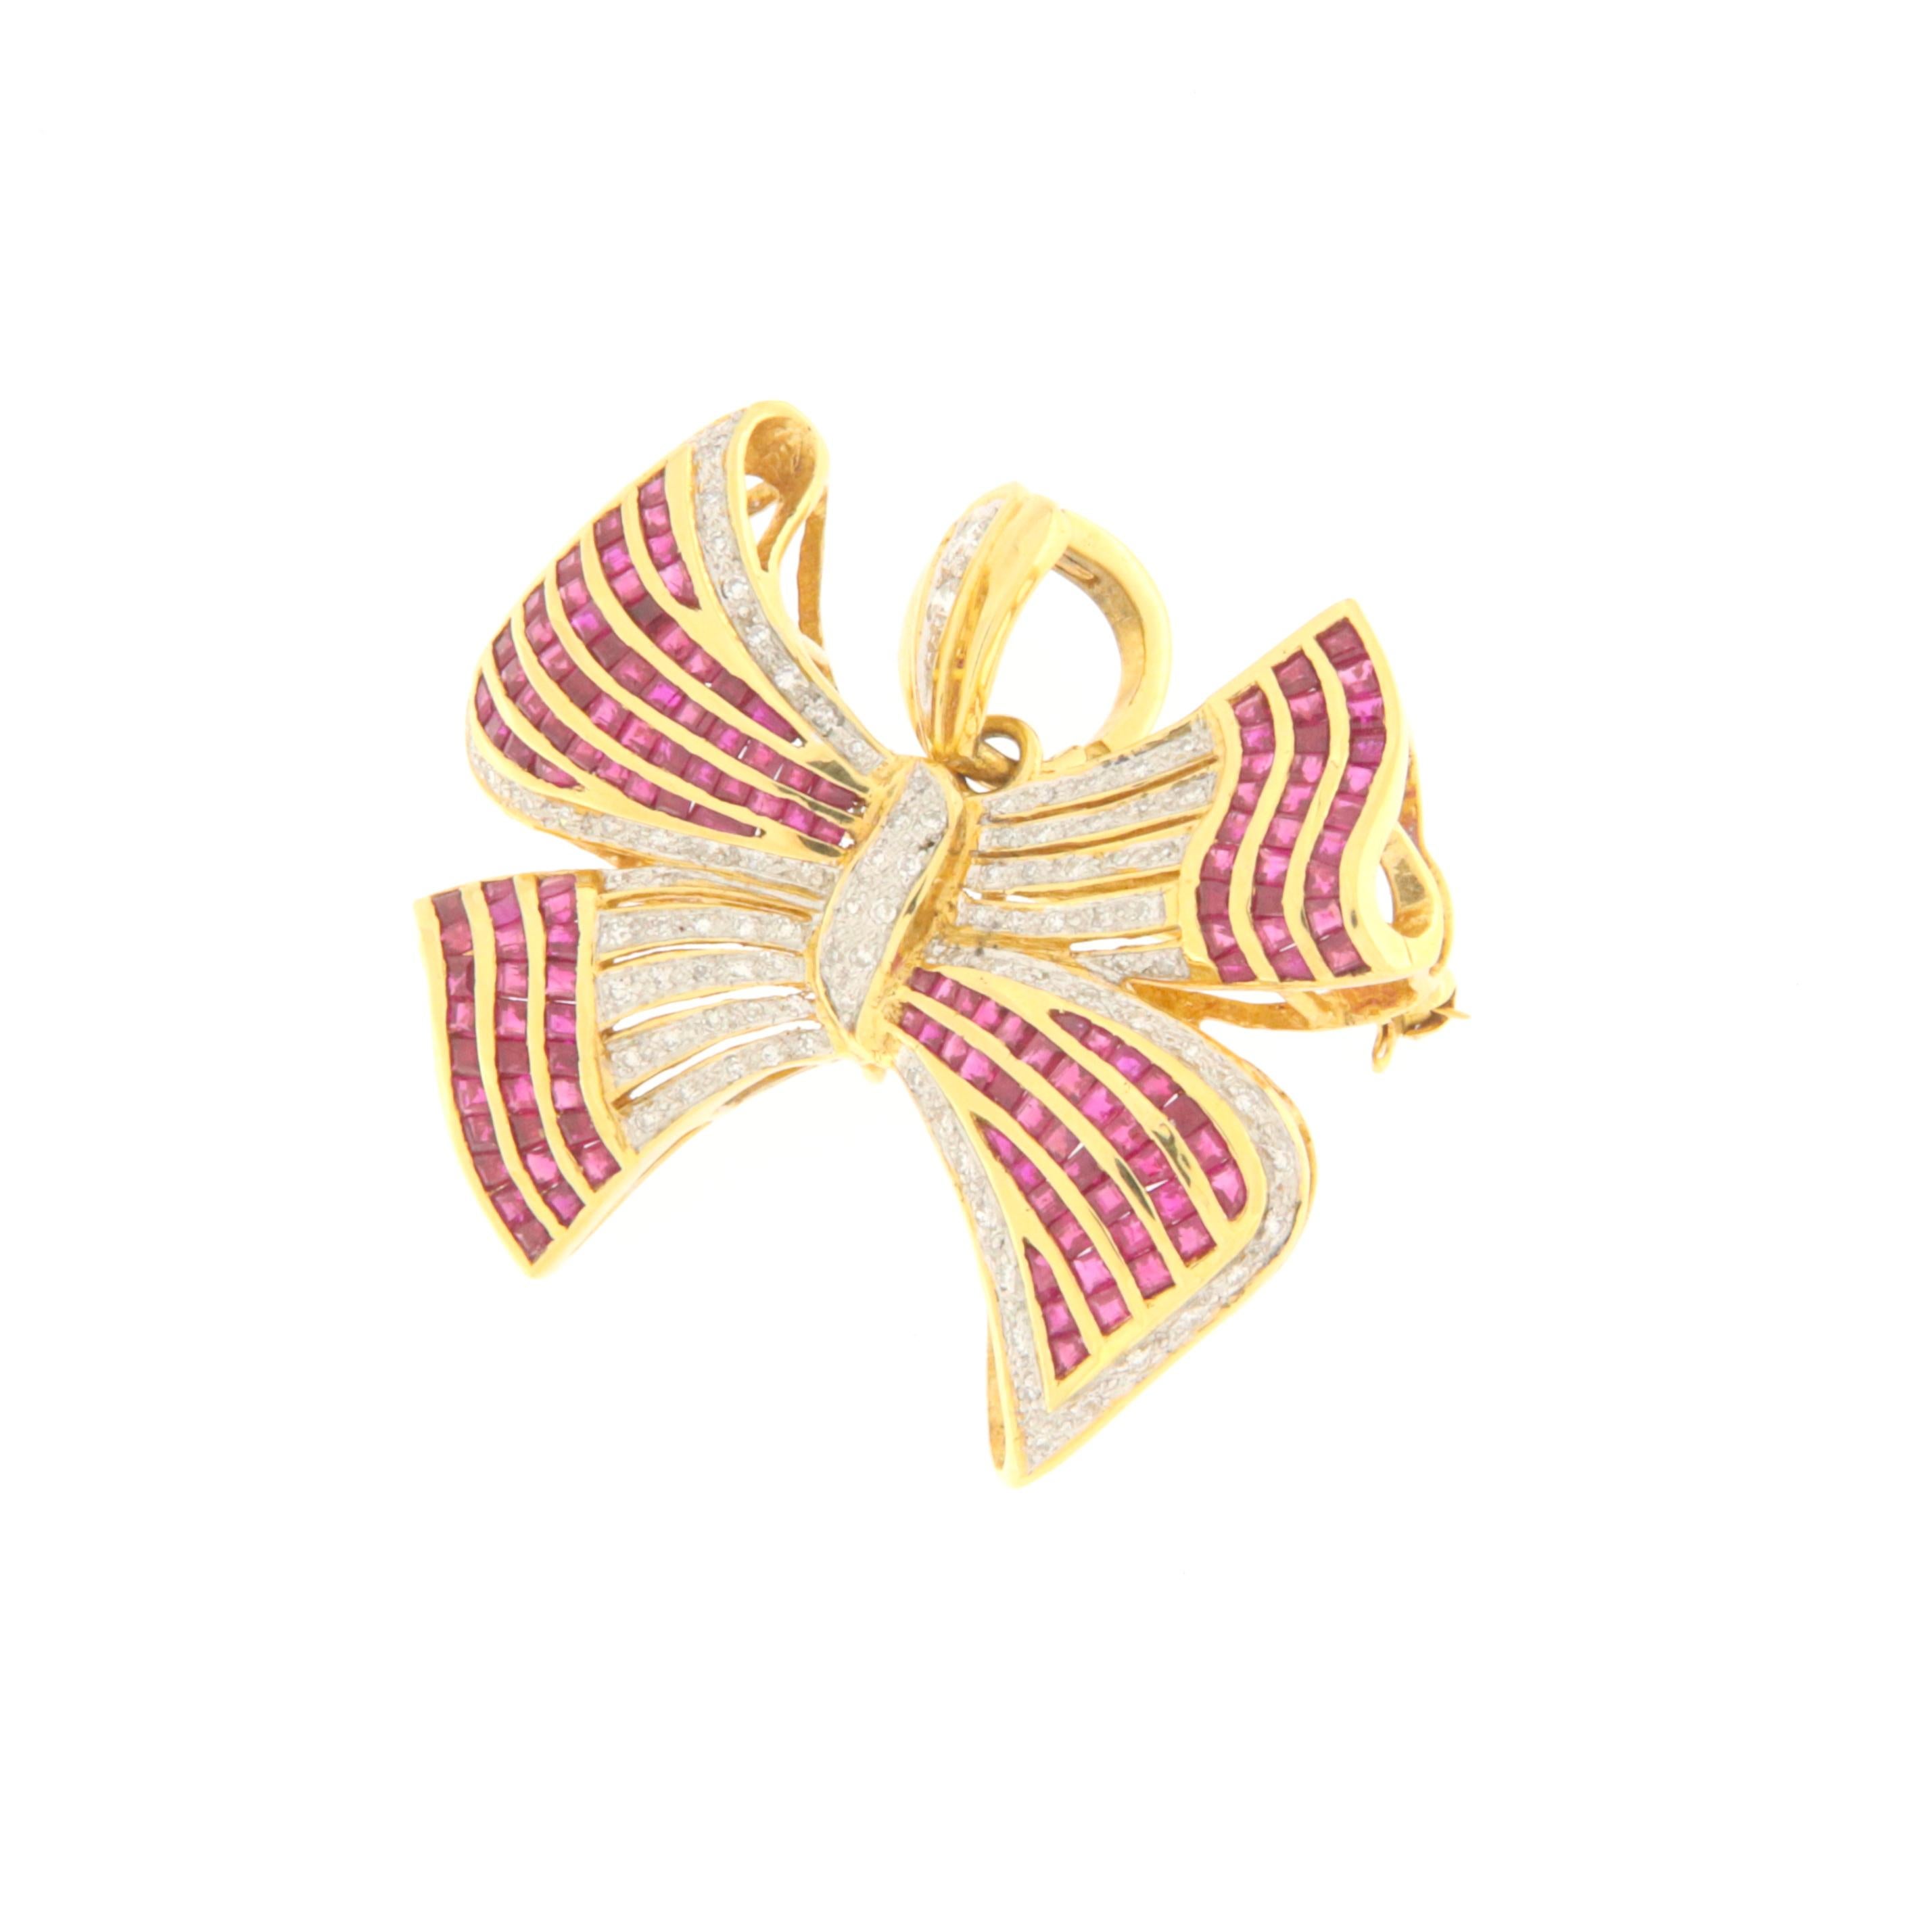 Amazing bow 18 karat yellow gold brooch and pendant. Butterfly Handmade by our craftsmen assembled with diamonds and rubies

Bow total Weight 19.10 grams
Rubies total weight 4.15 karat
Diamonds weight 1.30 karat